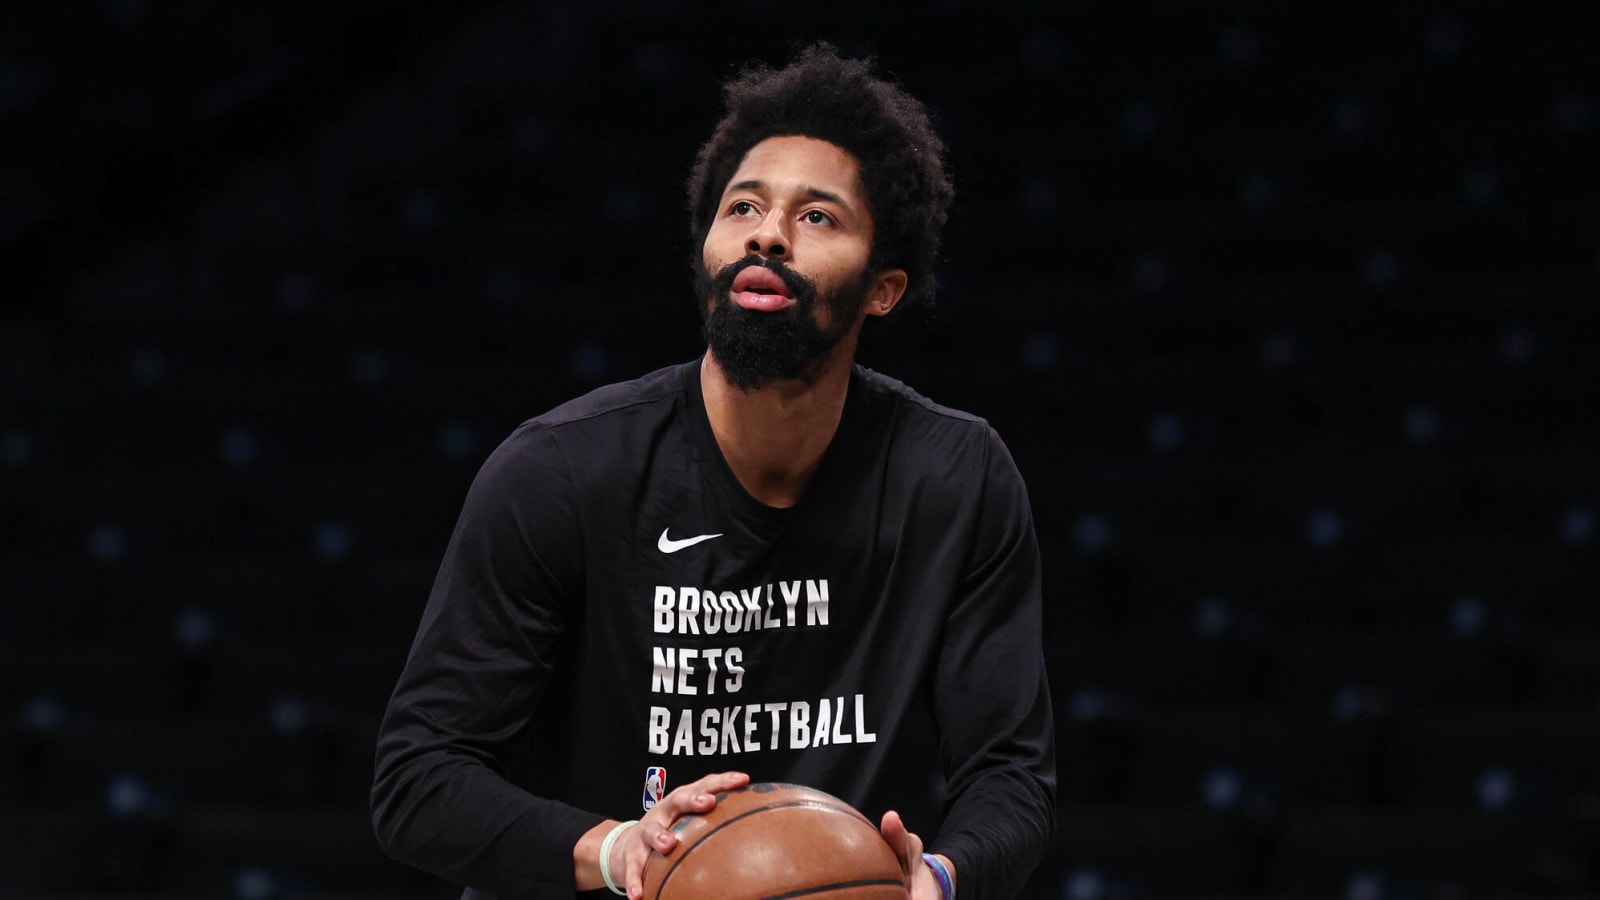 Spencer Dinwiddie to sign with Western Conference team